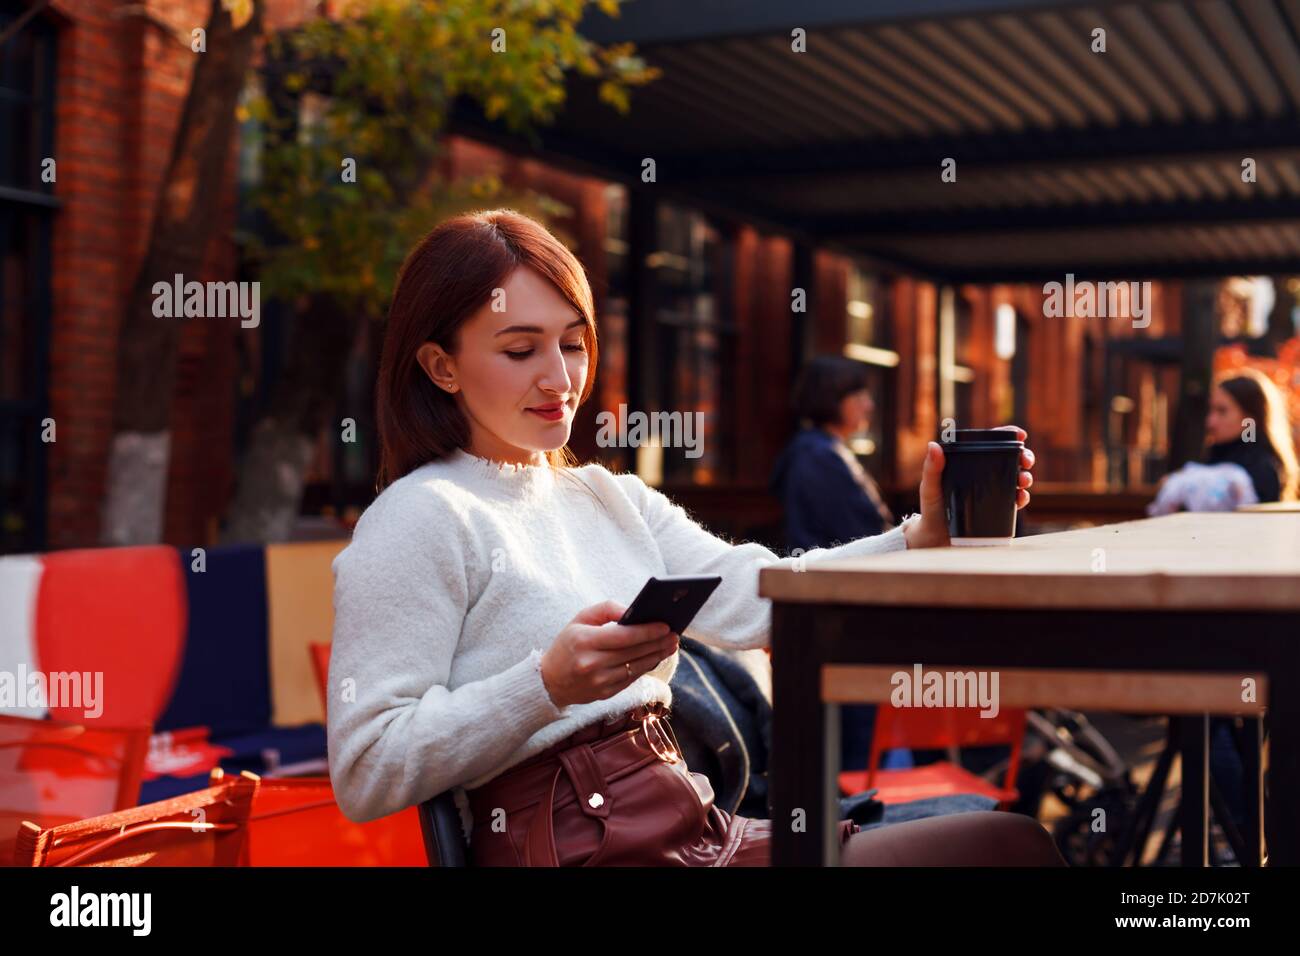 Online dating concept. Smiling young woman reading message from her smartphone. Stock Photo